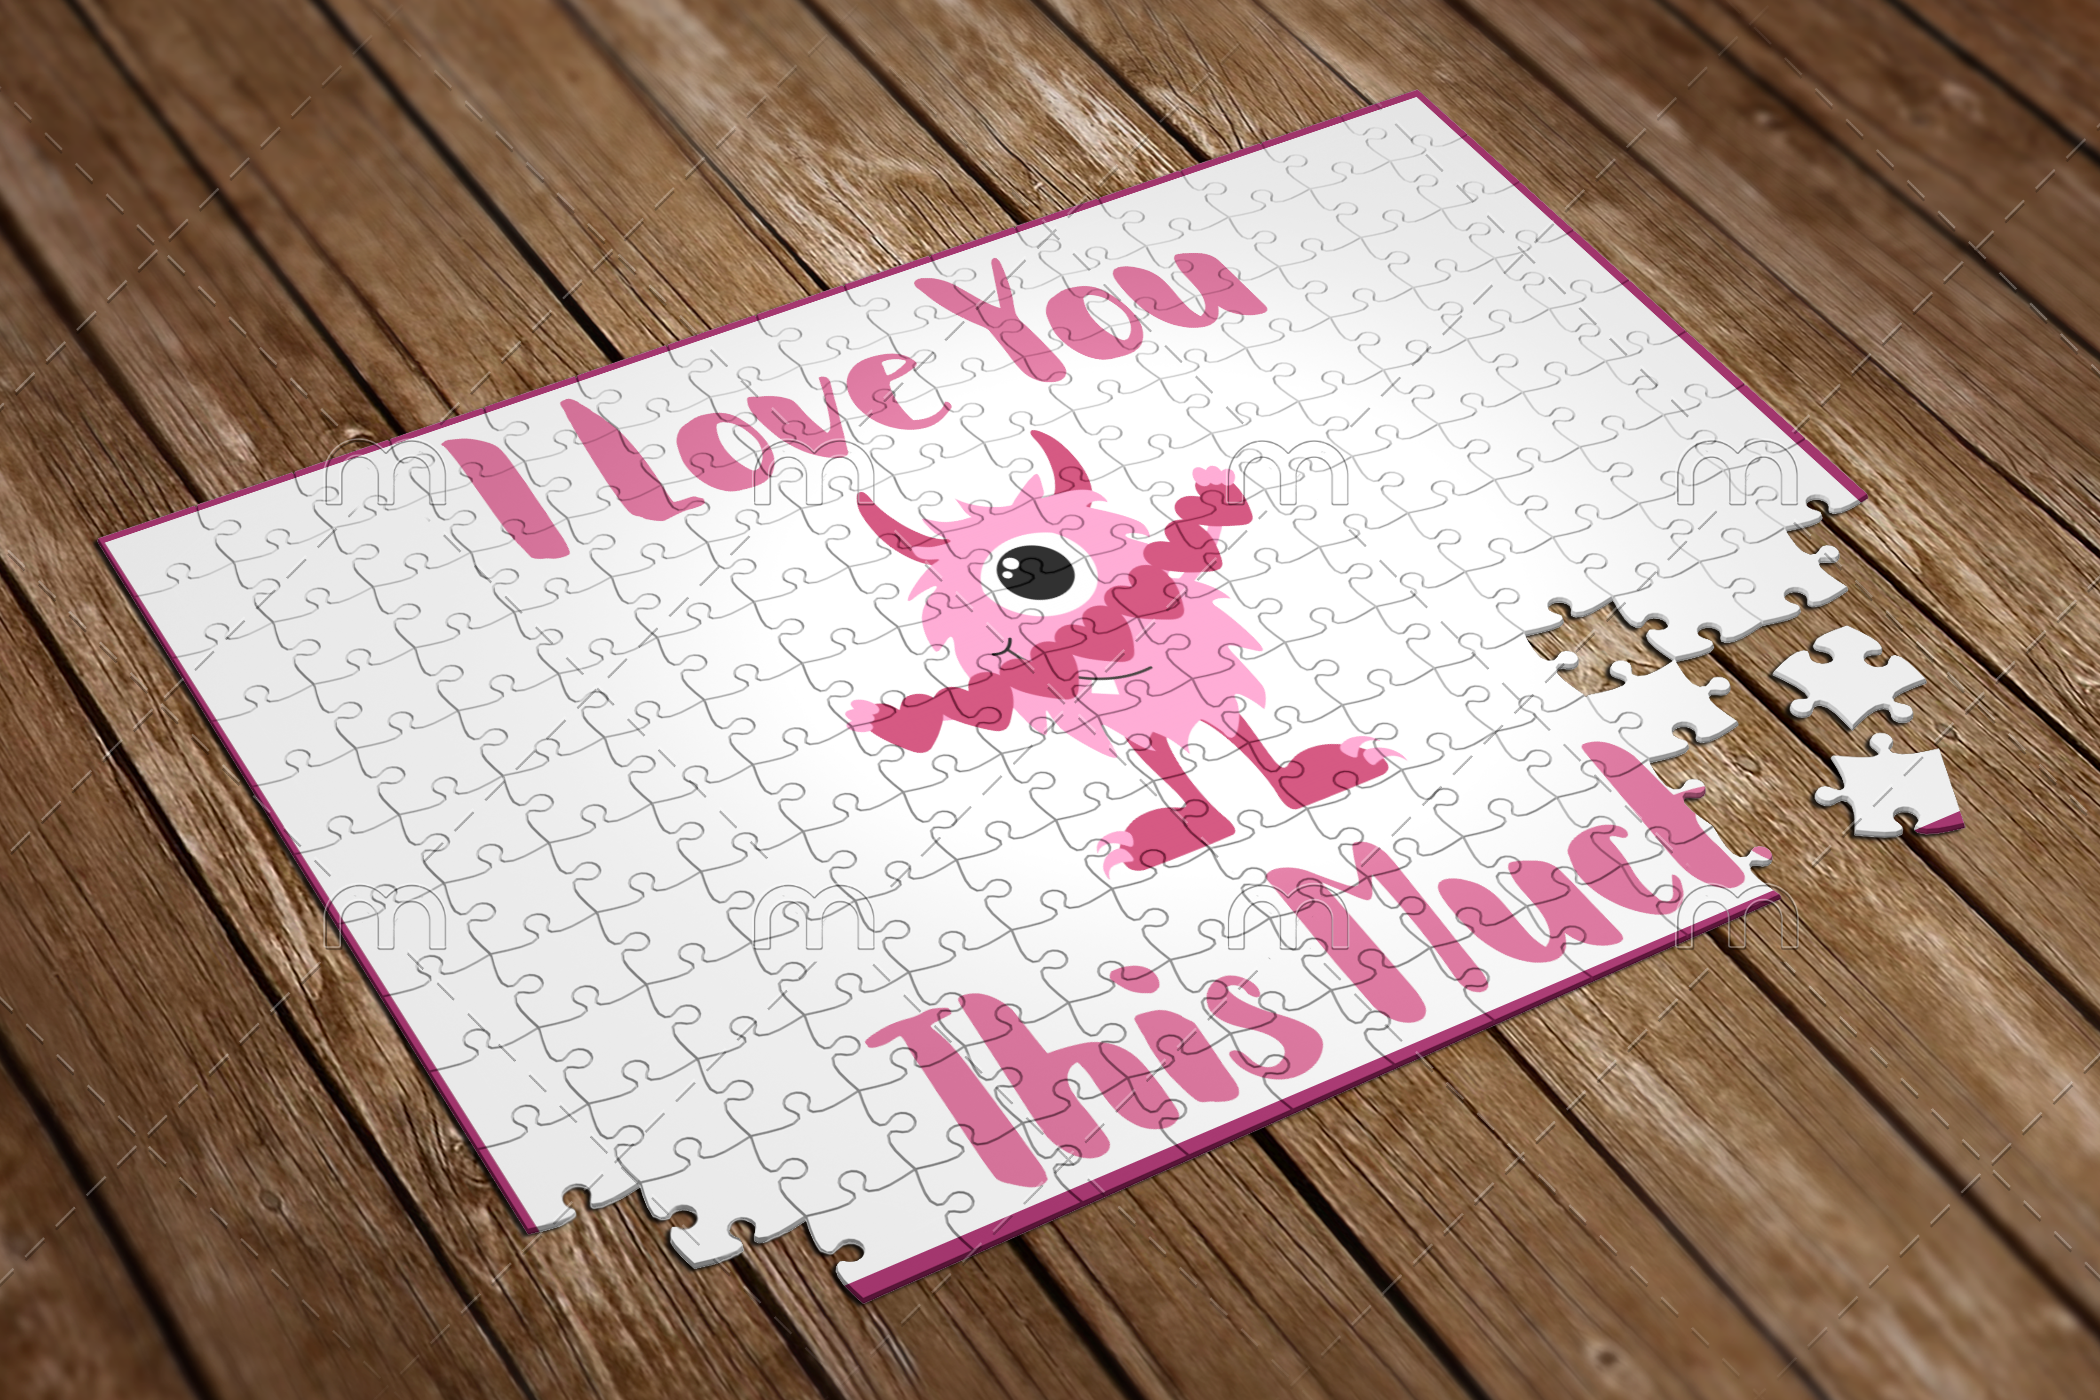 i love you this much puzzle